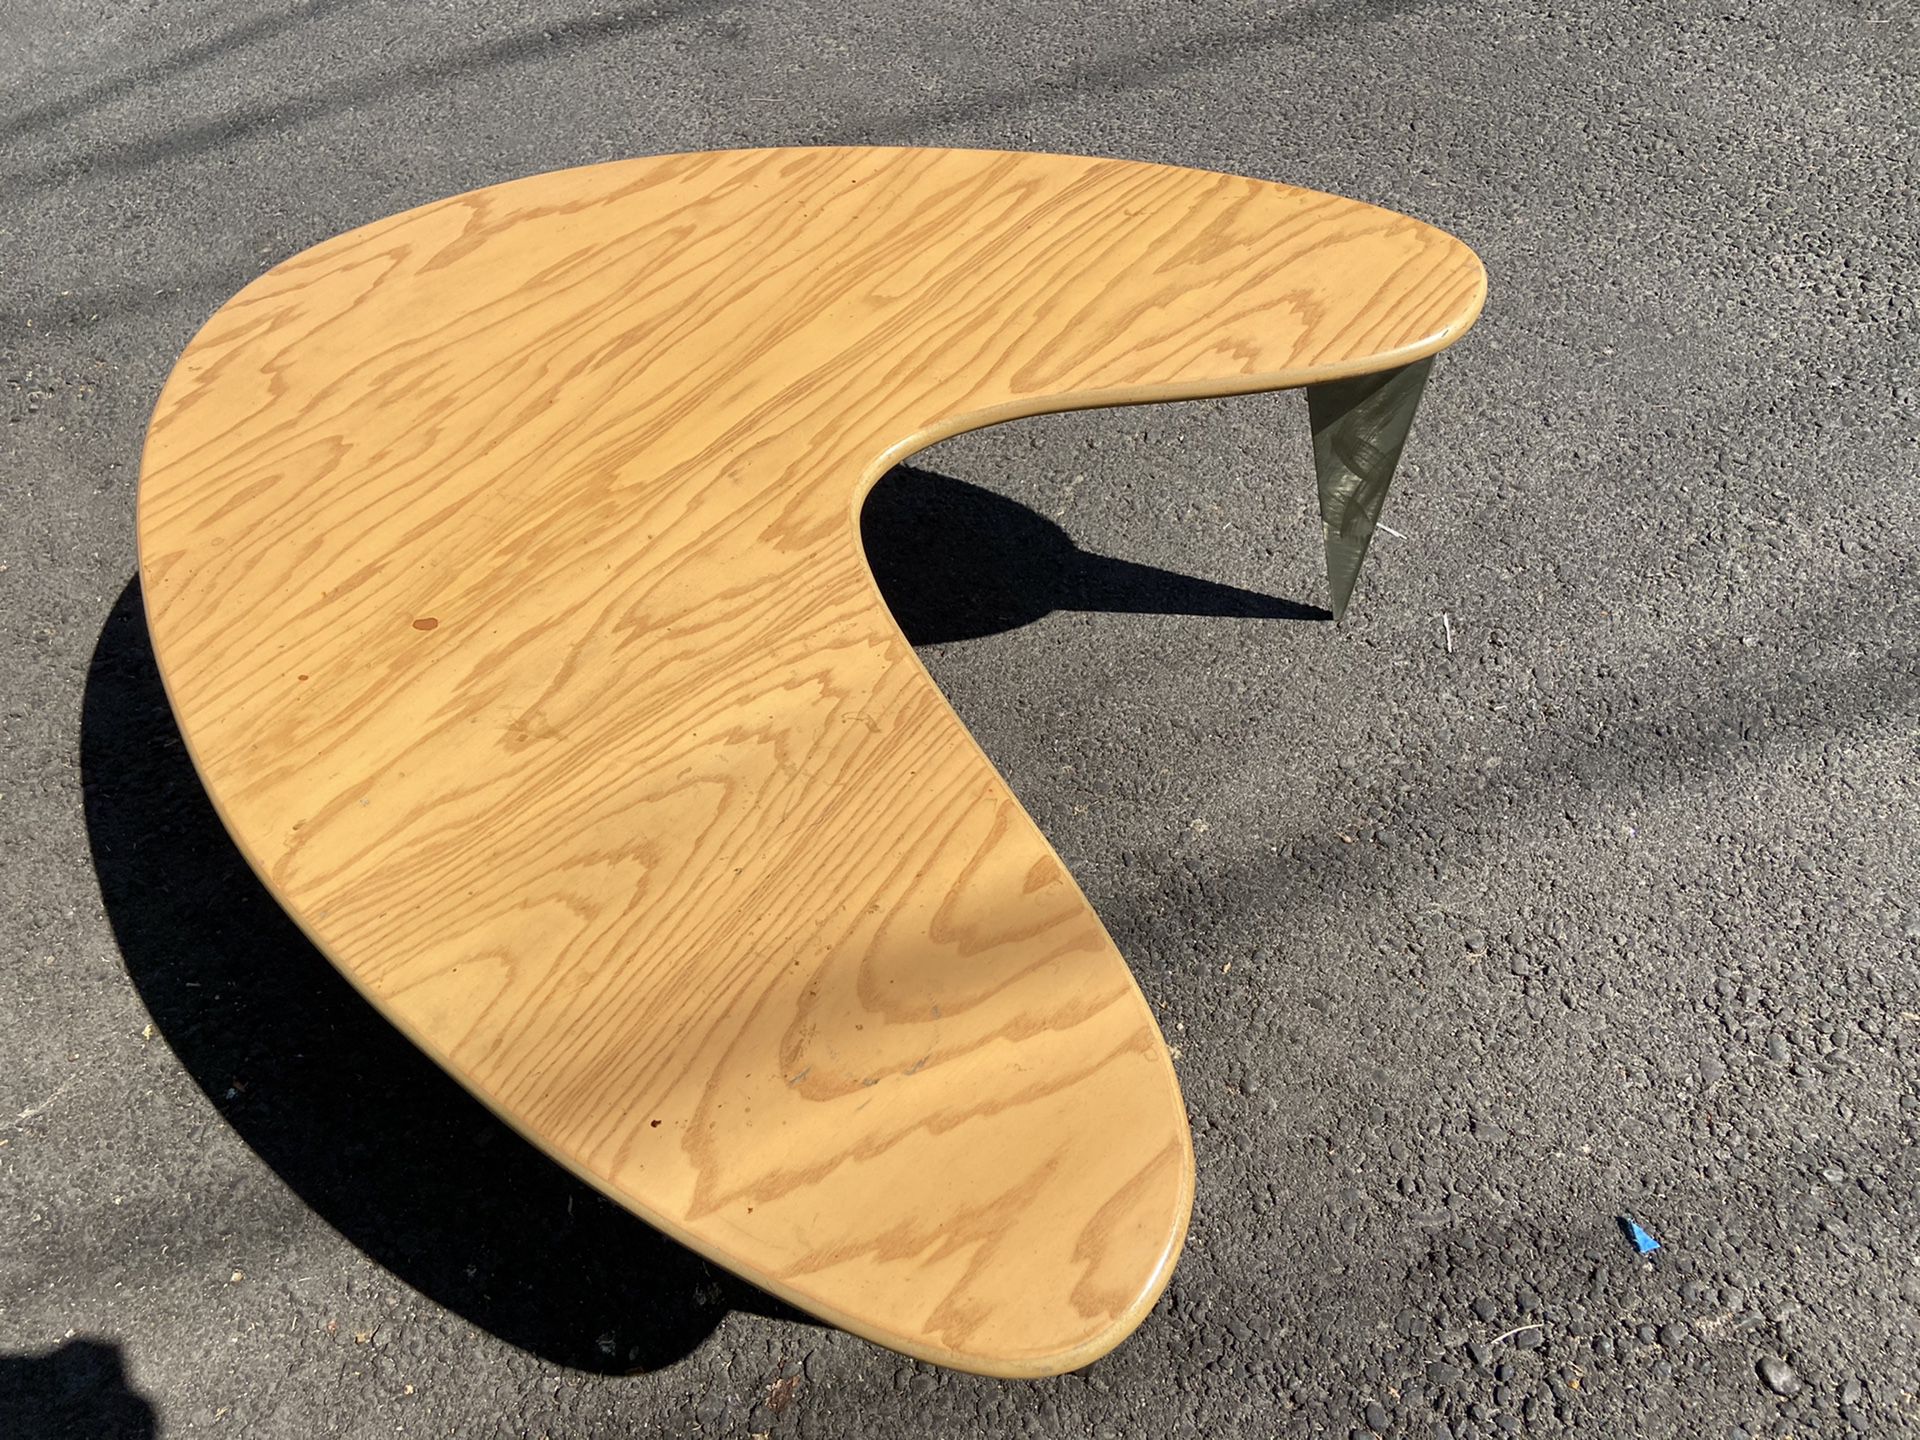 Kidney Bean Surfboard Boomerang style Mid Century Styled COFFEE TABLE END TABLE ACCENT TABLE